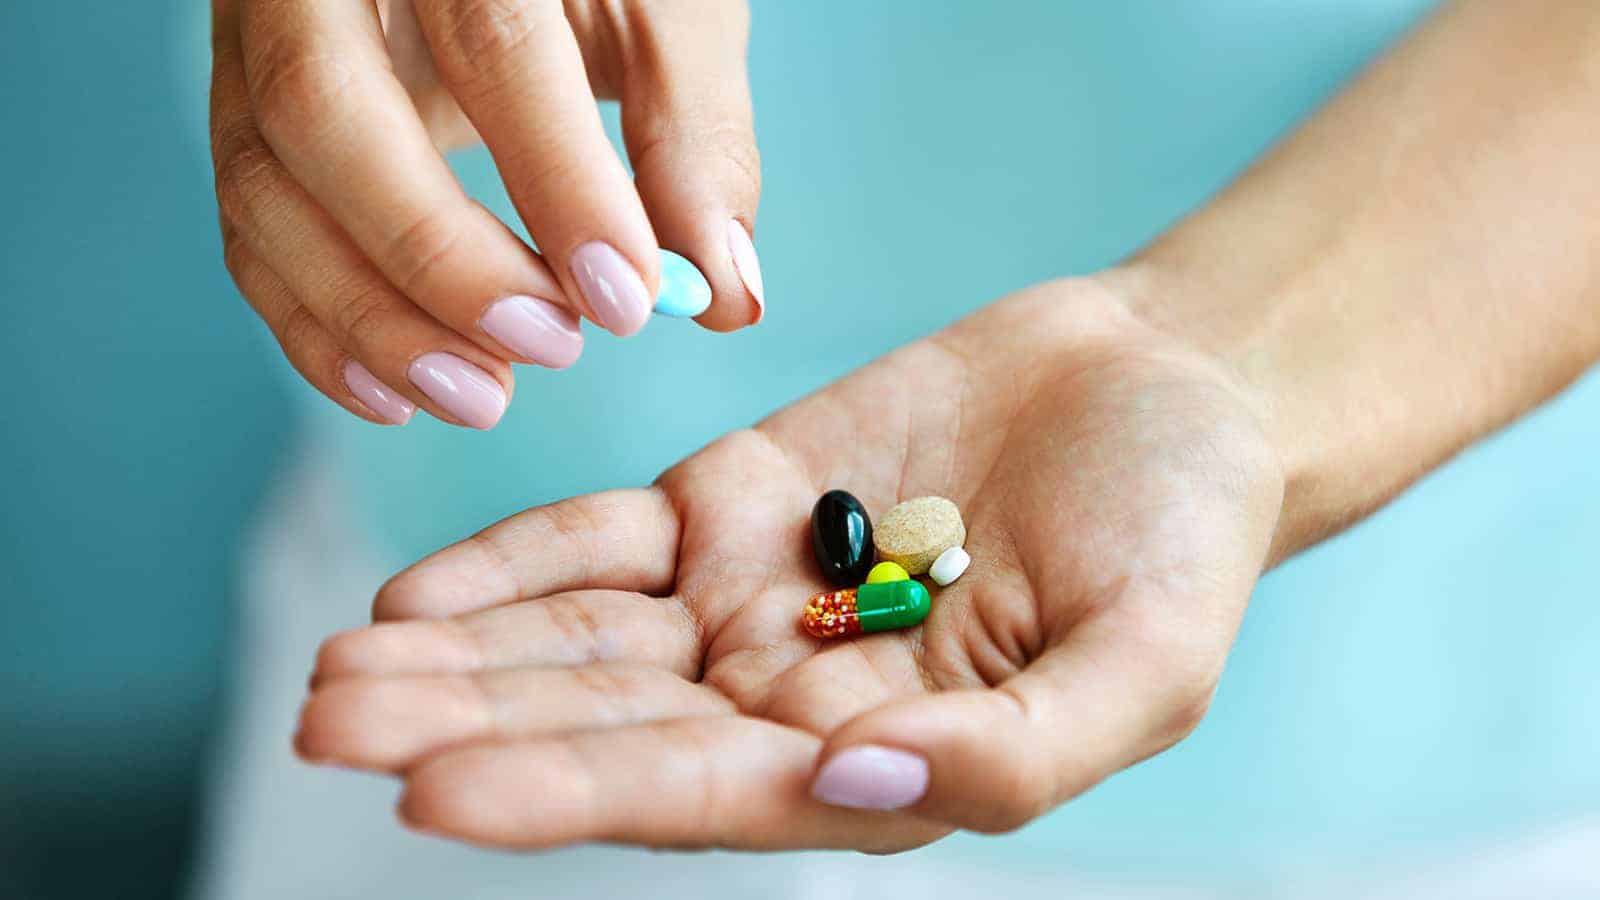 The 10 Best Supplements For Health